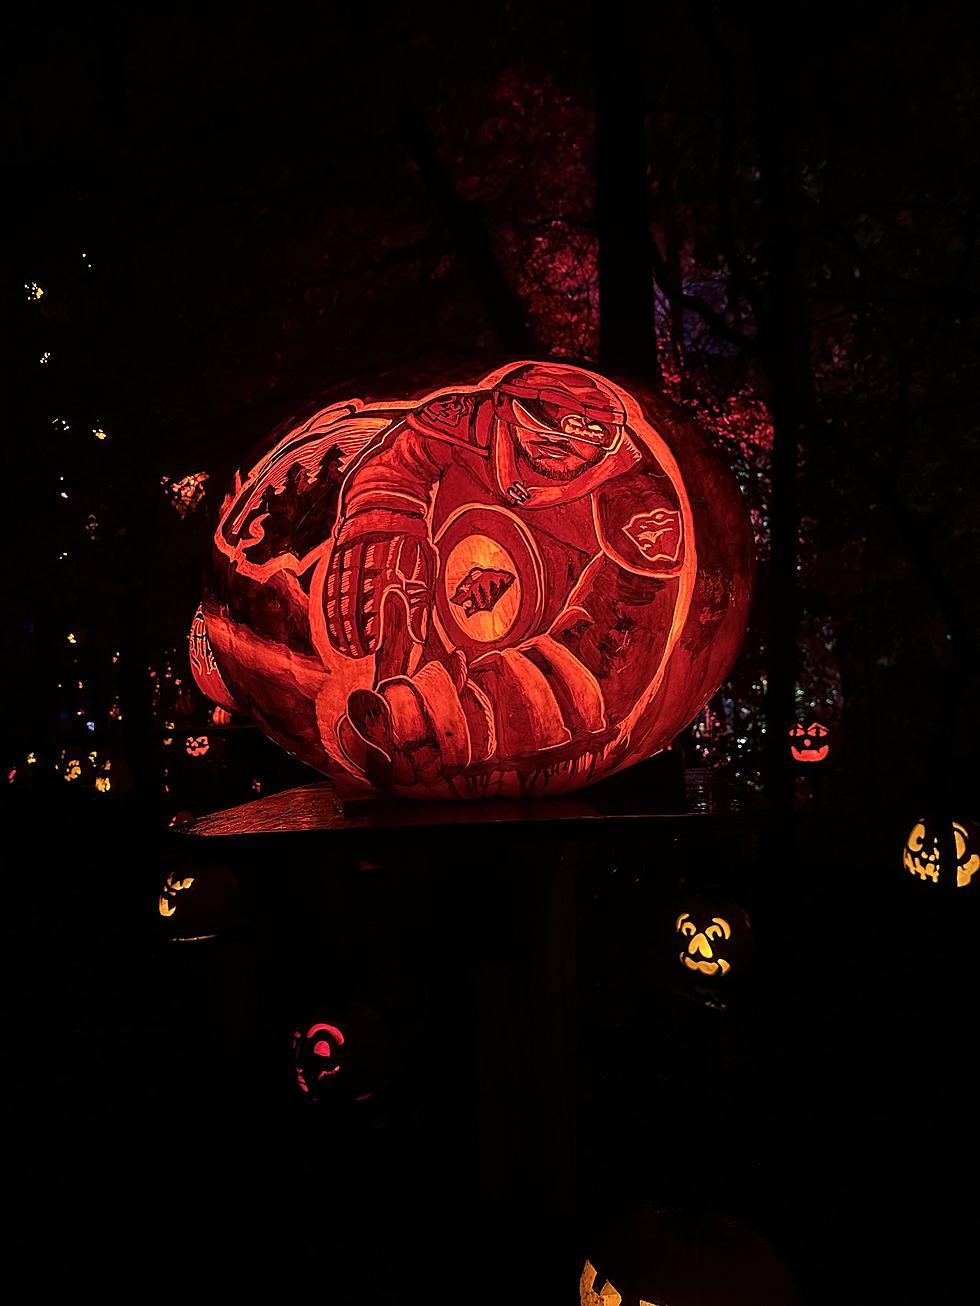 Check Out These EPIC Pumpkins At The Minnesota Zoo’s Jack-O-Lantern Spectacular! [GALLERY]